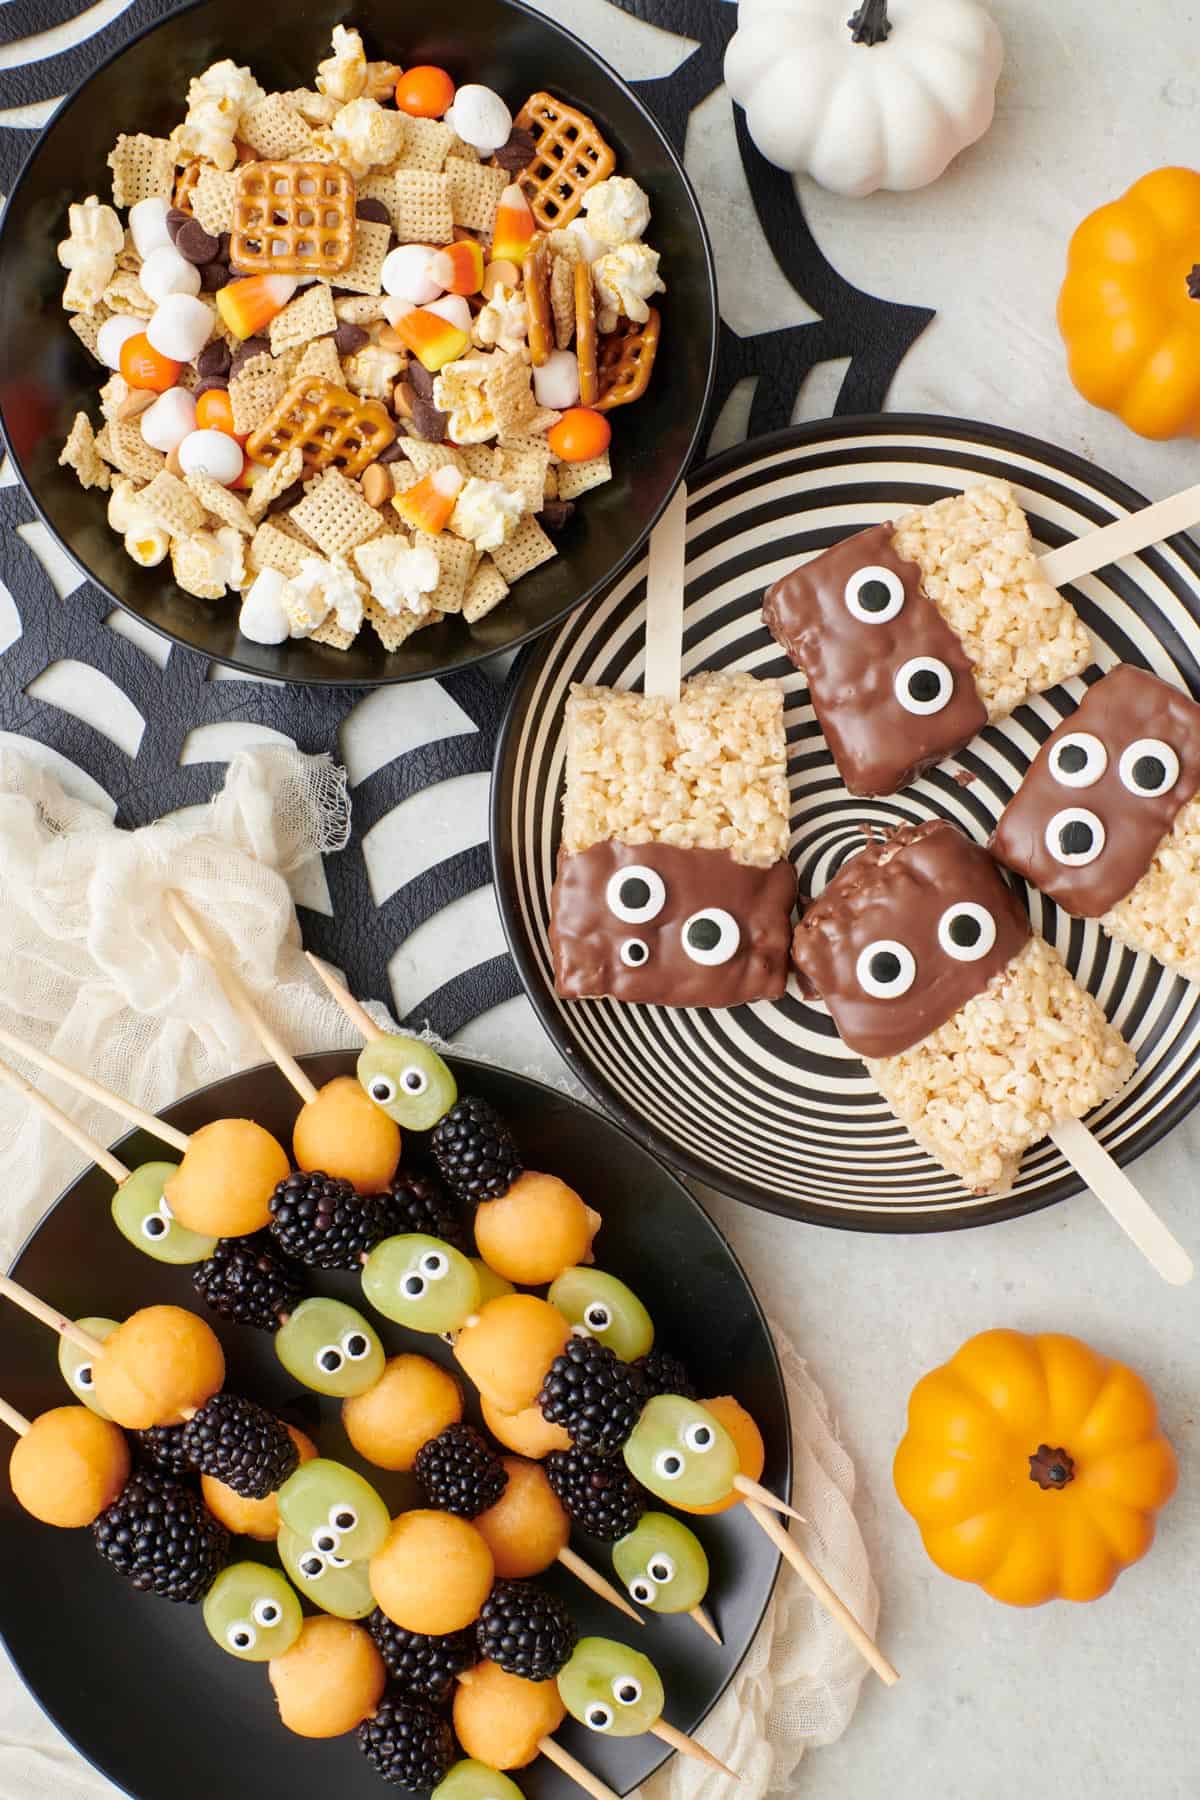 Halloween treats in individual dishes: monster munch, monster rice krispies, and halloween fruit kabobs.